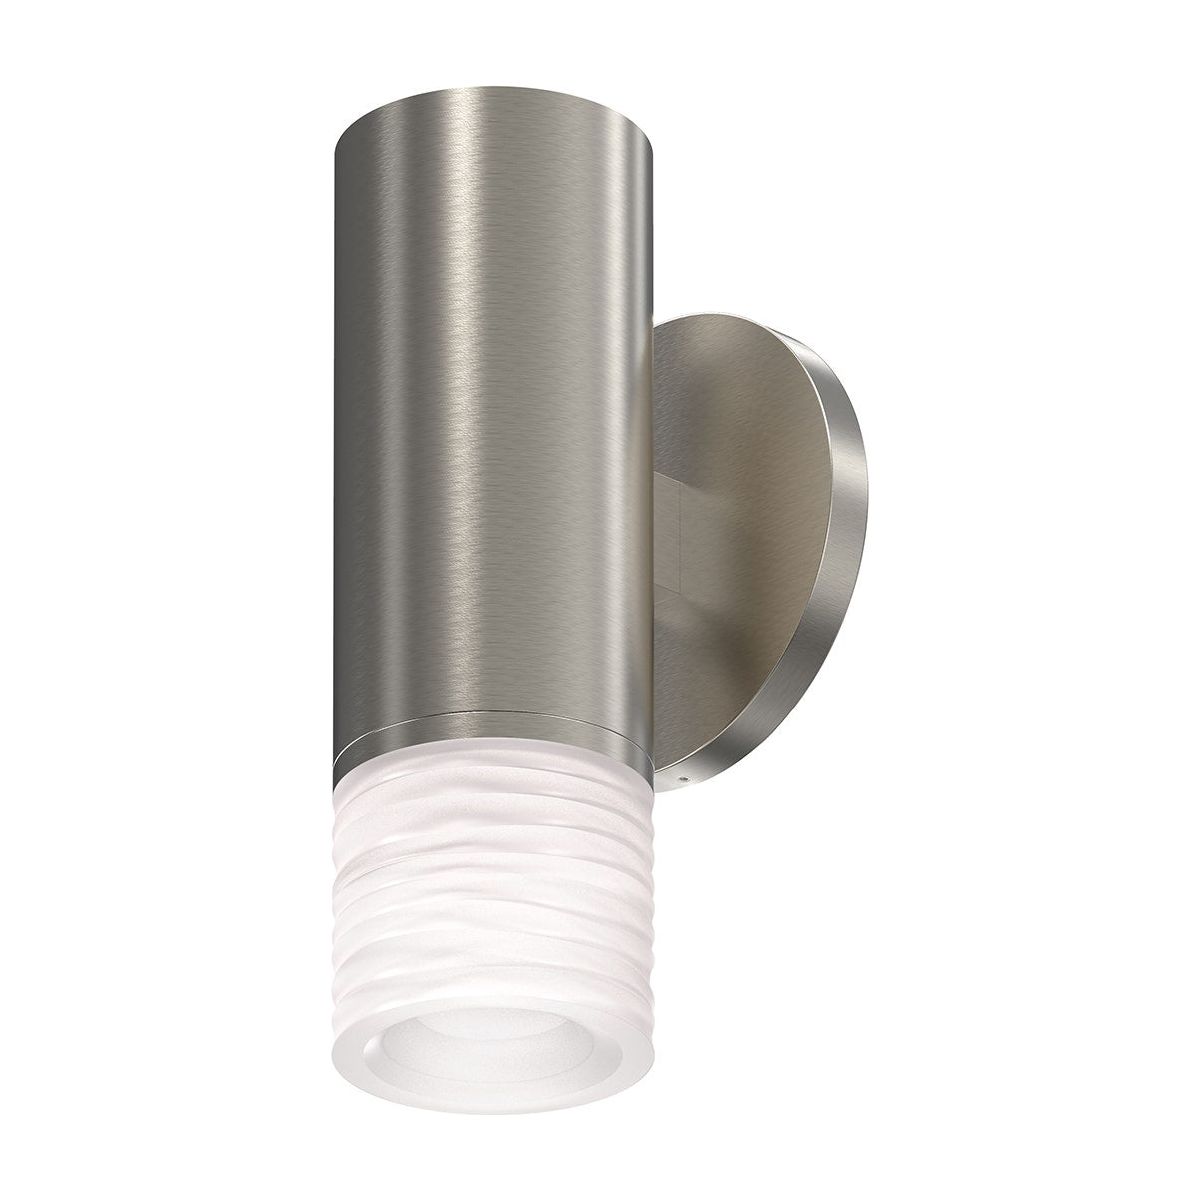 ALC 3" One-Sided LED Sconce